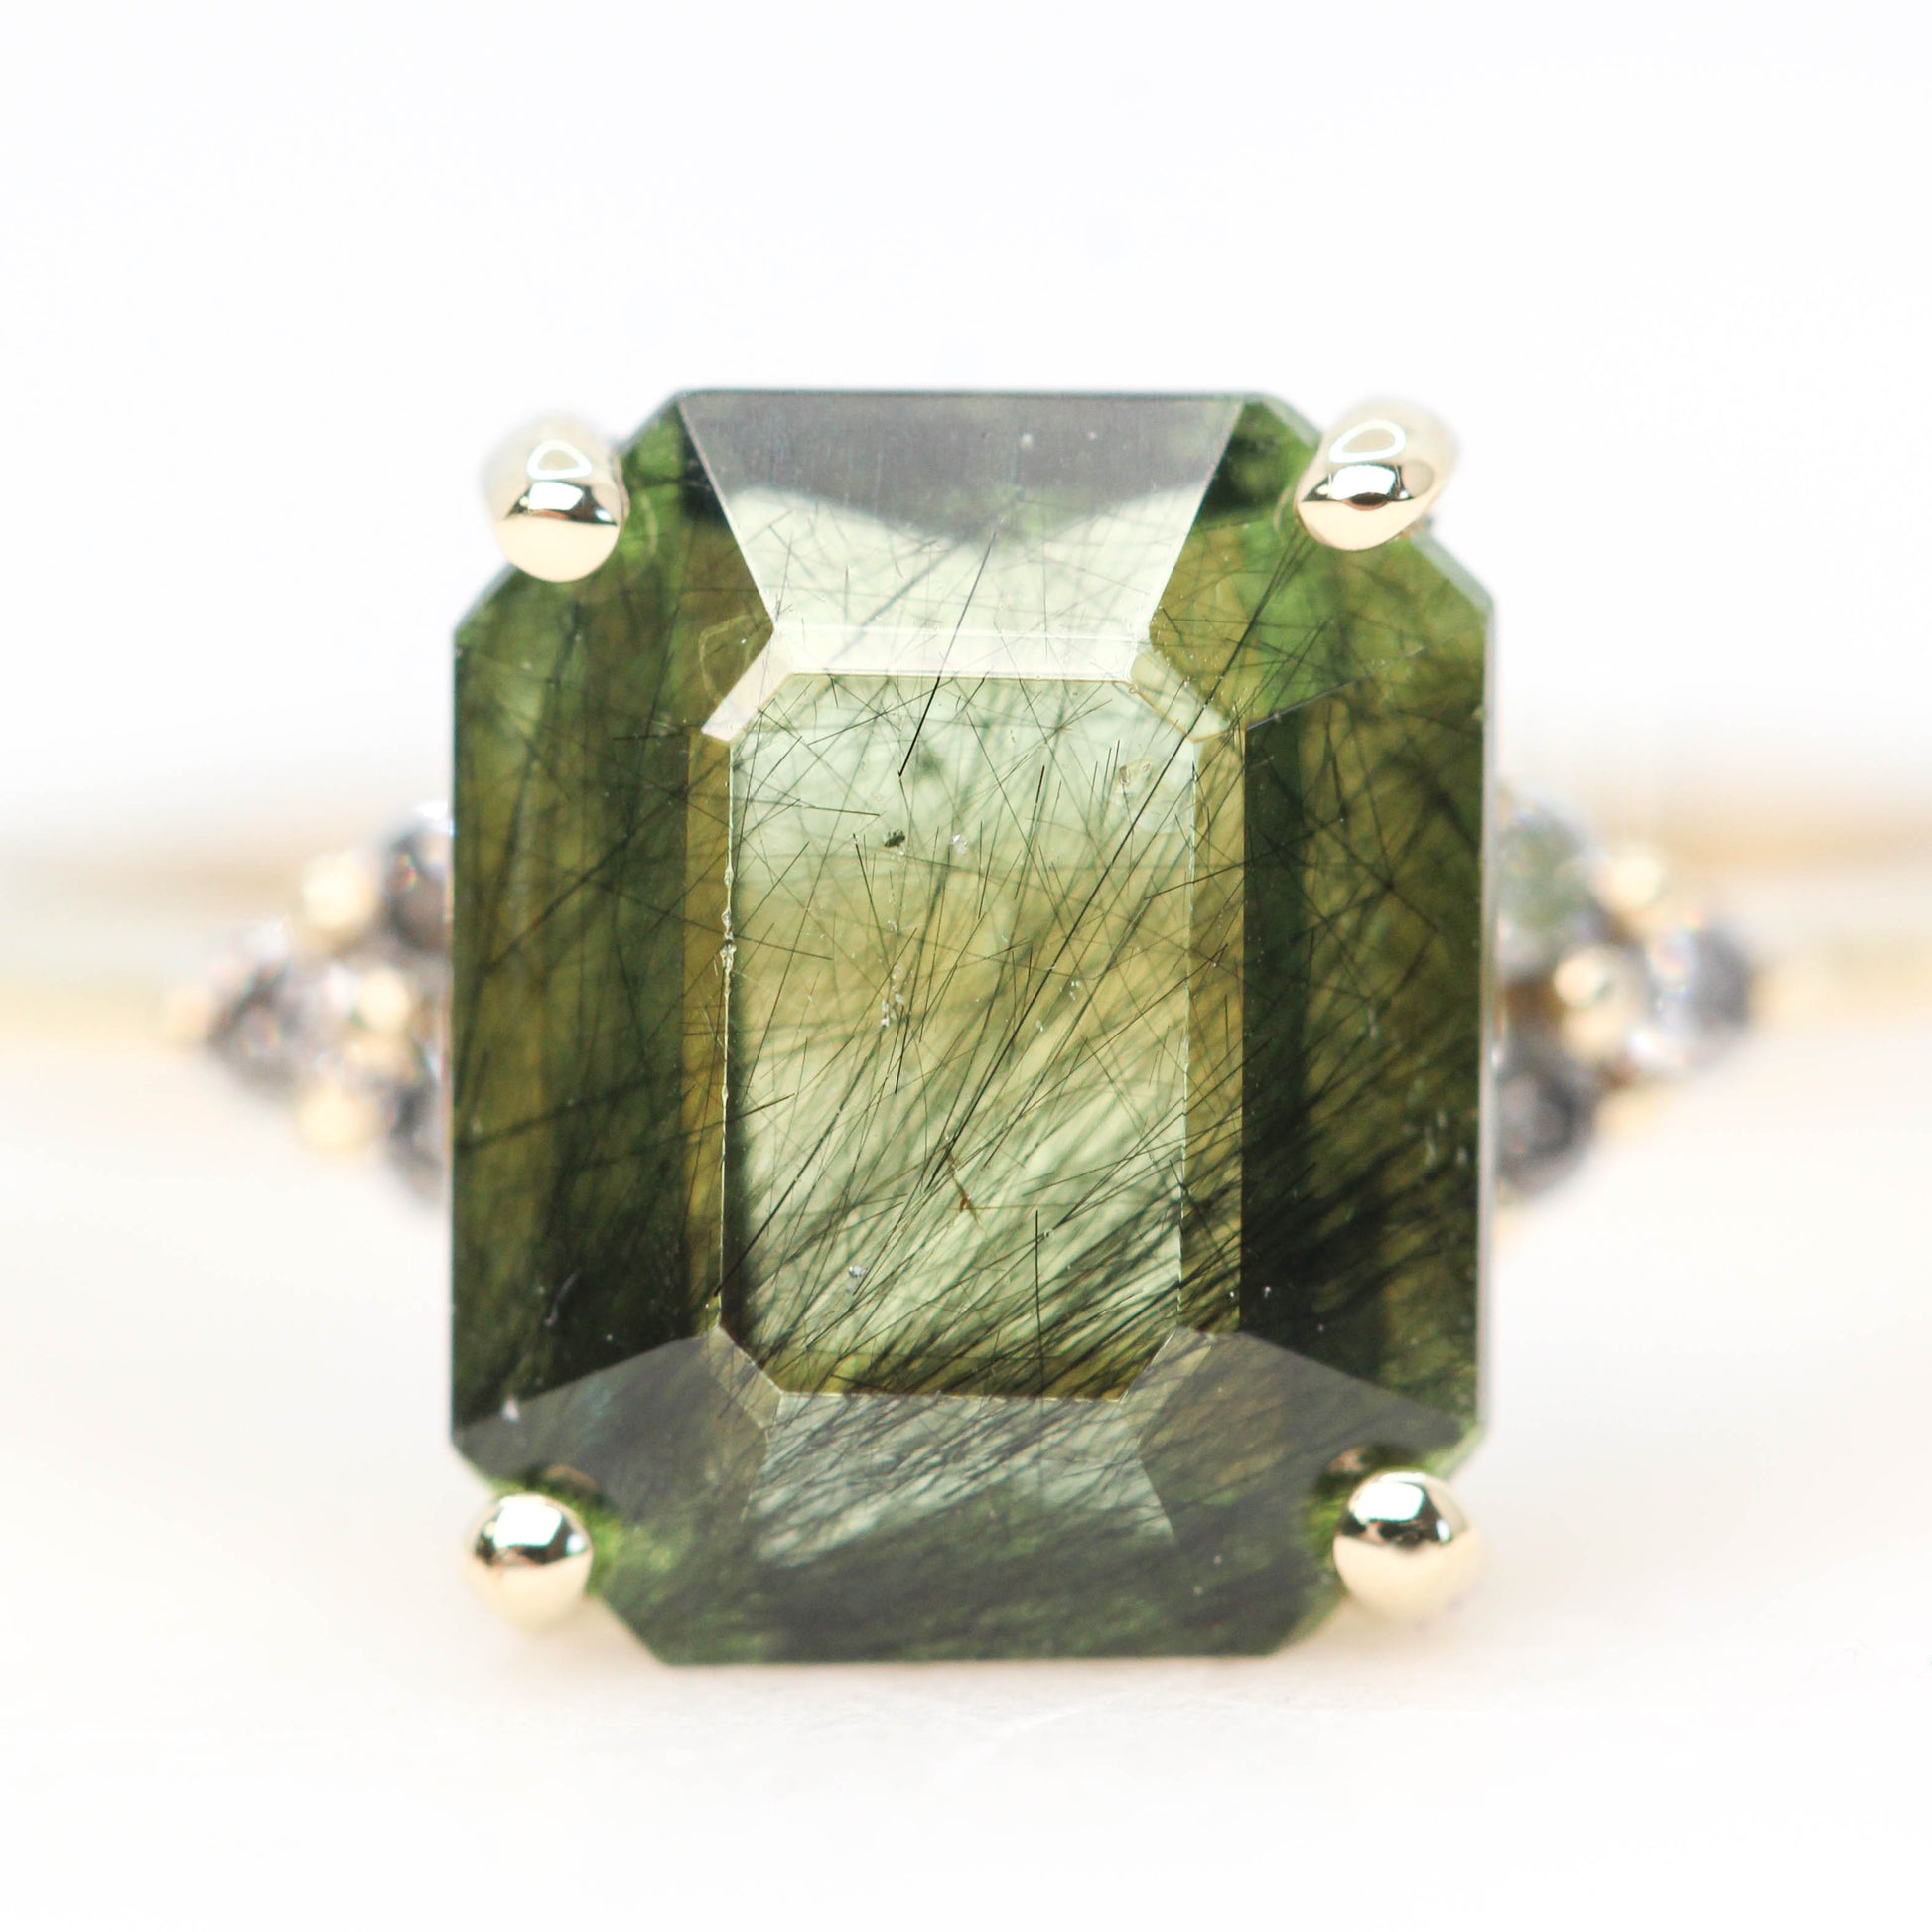 Imogene Ring with a 3.65 Carat Emerald Cut Peridot and Gray Accent Diamonds in 14k Yellow Gold - Ready to Size and Ship - Midwinter Co. Alternative Bridal Rings and Modern Fine Jewelry